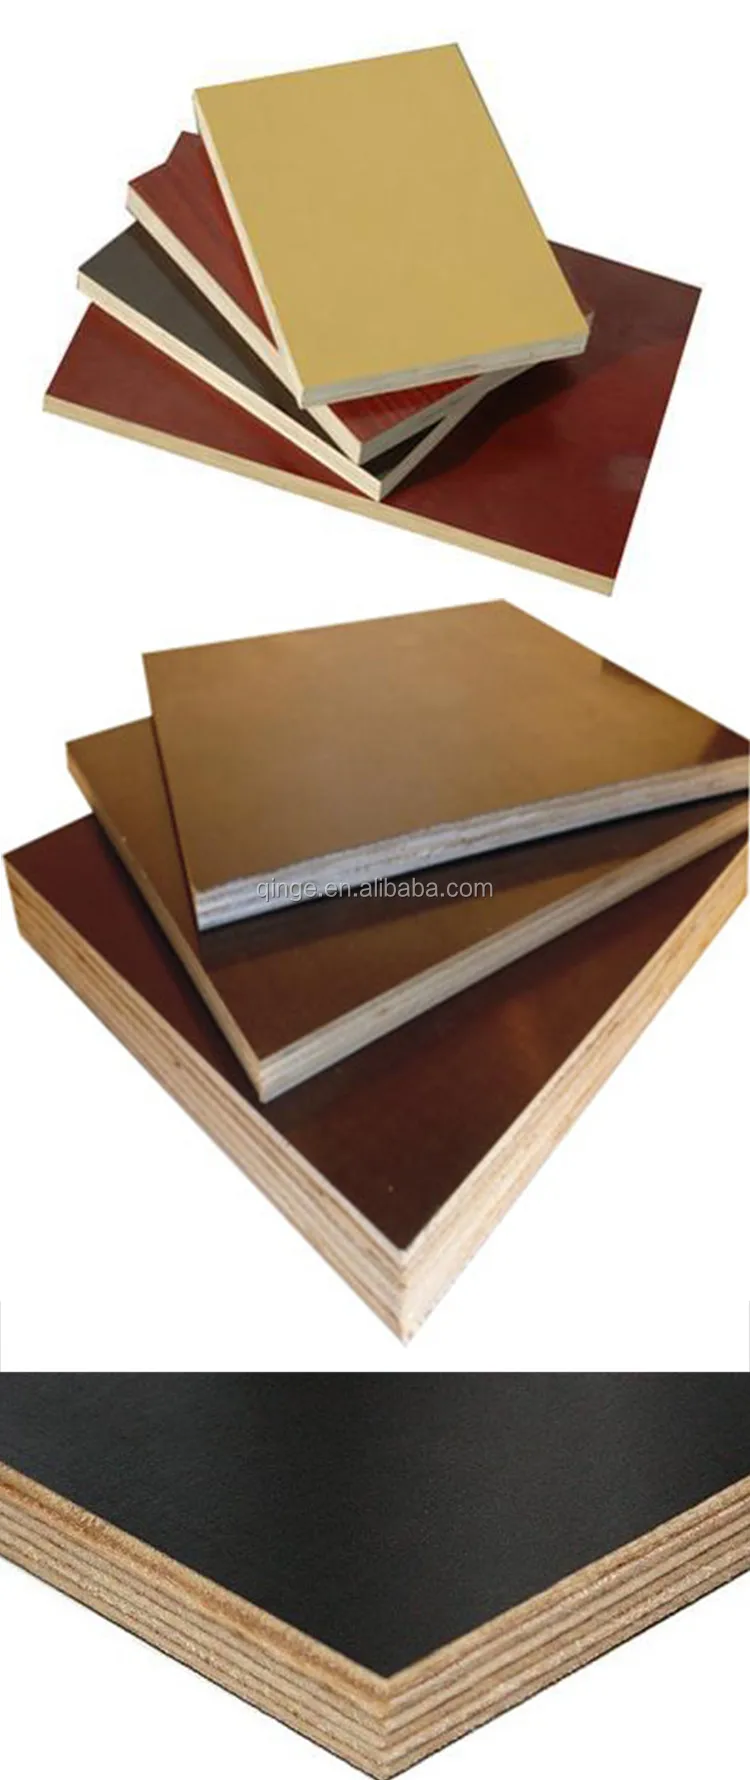 Manufacture Good Quality Marine Plywood Board